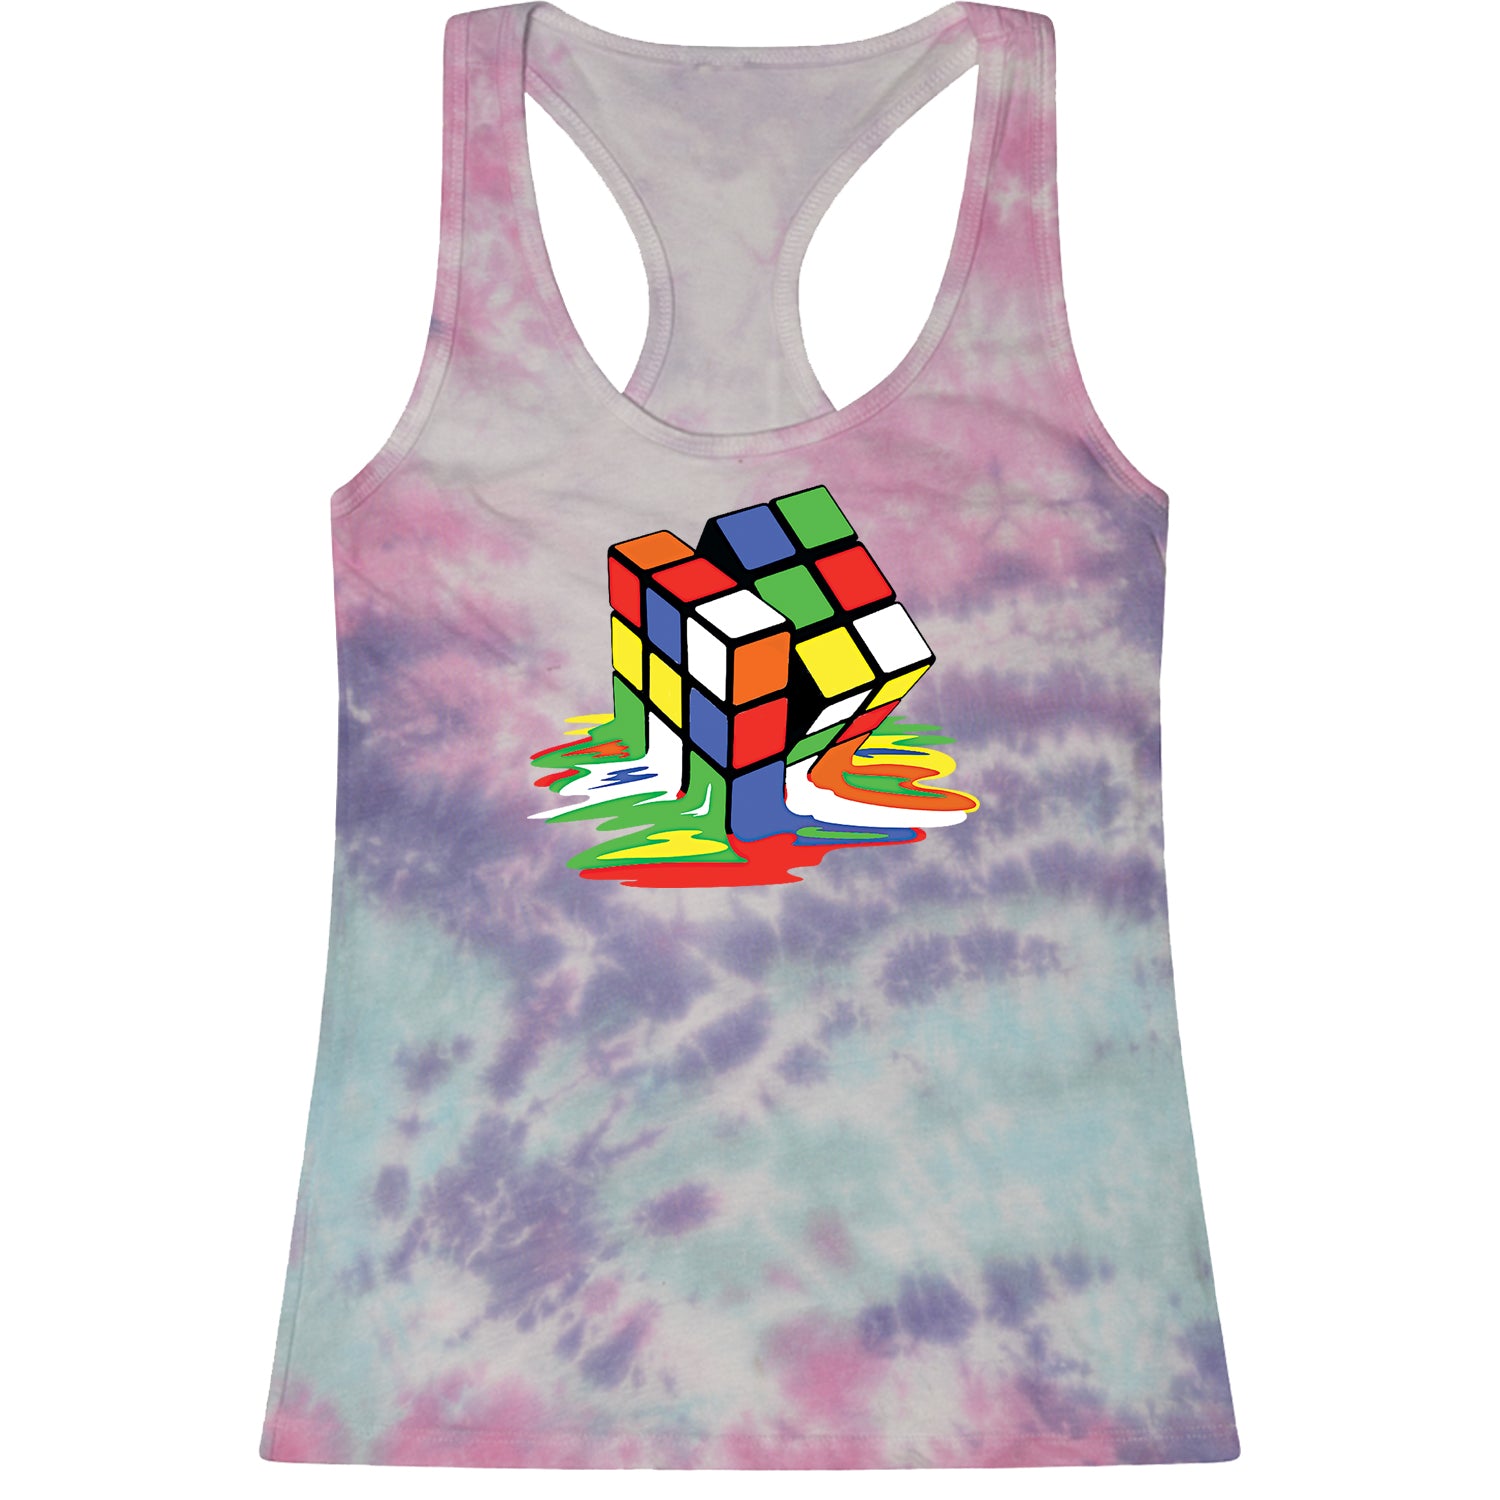 Melting Multi-Colored Cube Racerback Tank Top for Women gamer, gaming, nerd, shirt by Expression Tees